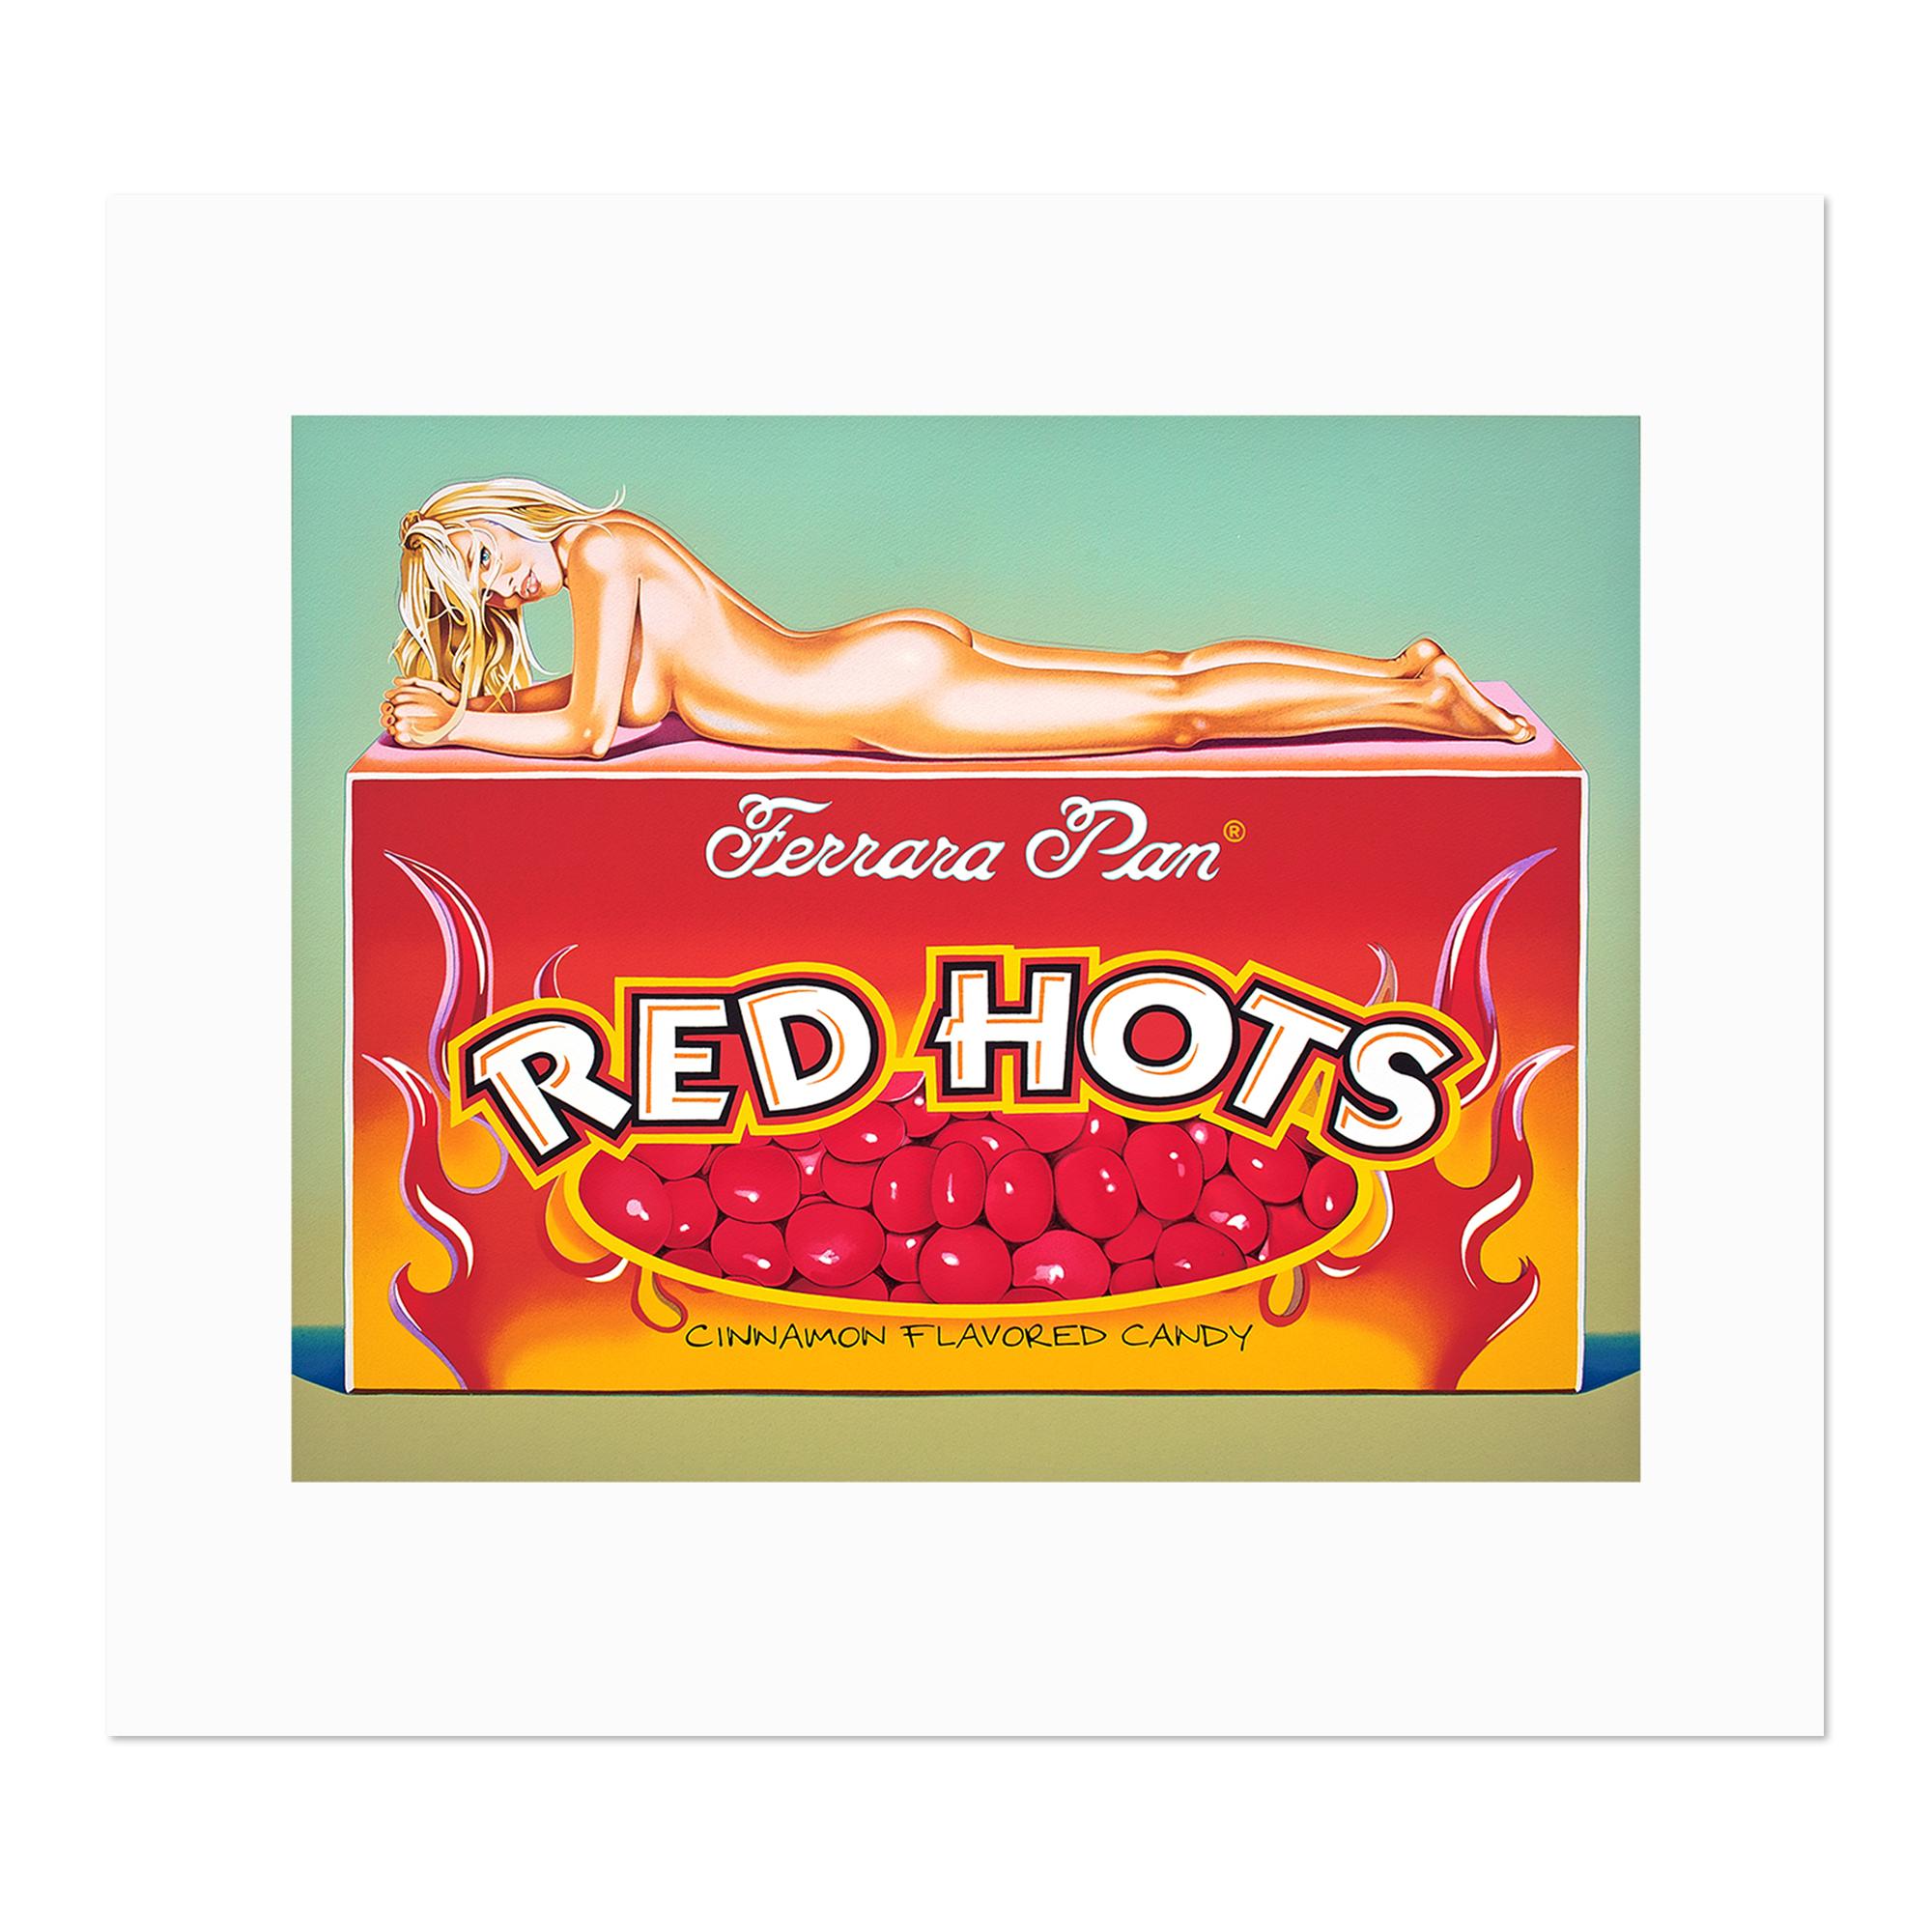 Mel Ramos (American, born 1935)
Red Hots, 2013
Medium: Lithograph in colors, on wove paper
Sheet dimensions: 88 x 100 cm
Image dimensions: 62 x 78 cm
Edition of 199: Hand signed and numbered
Condition: Mint